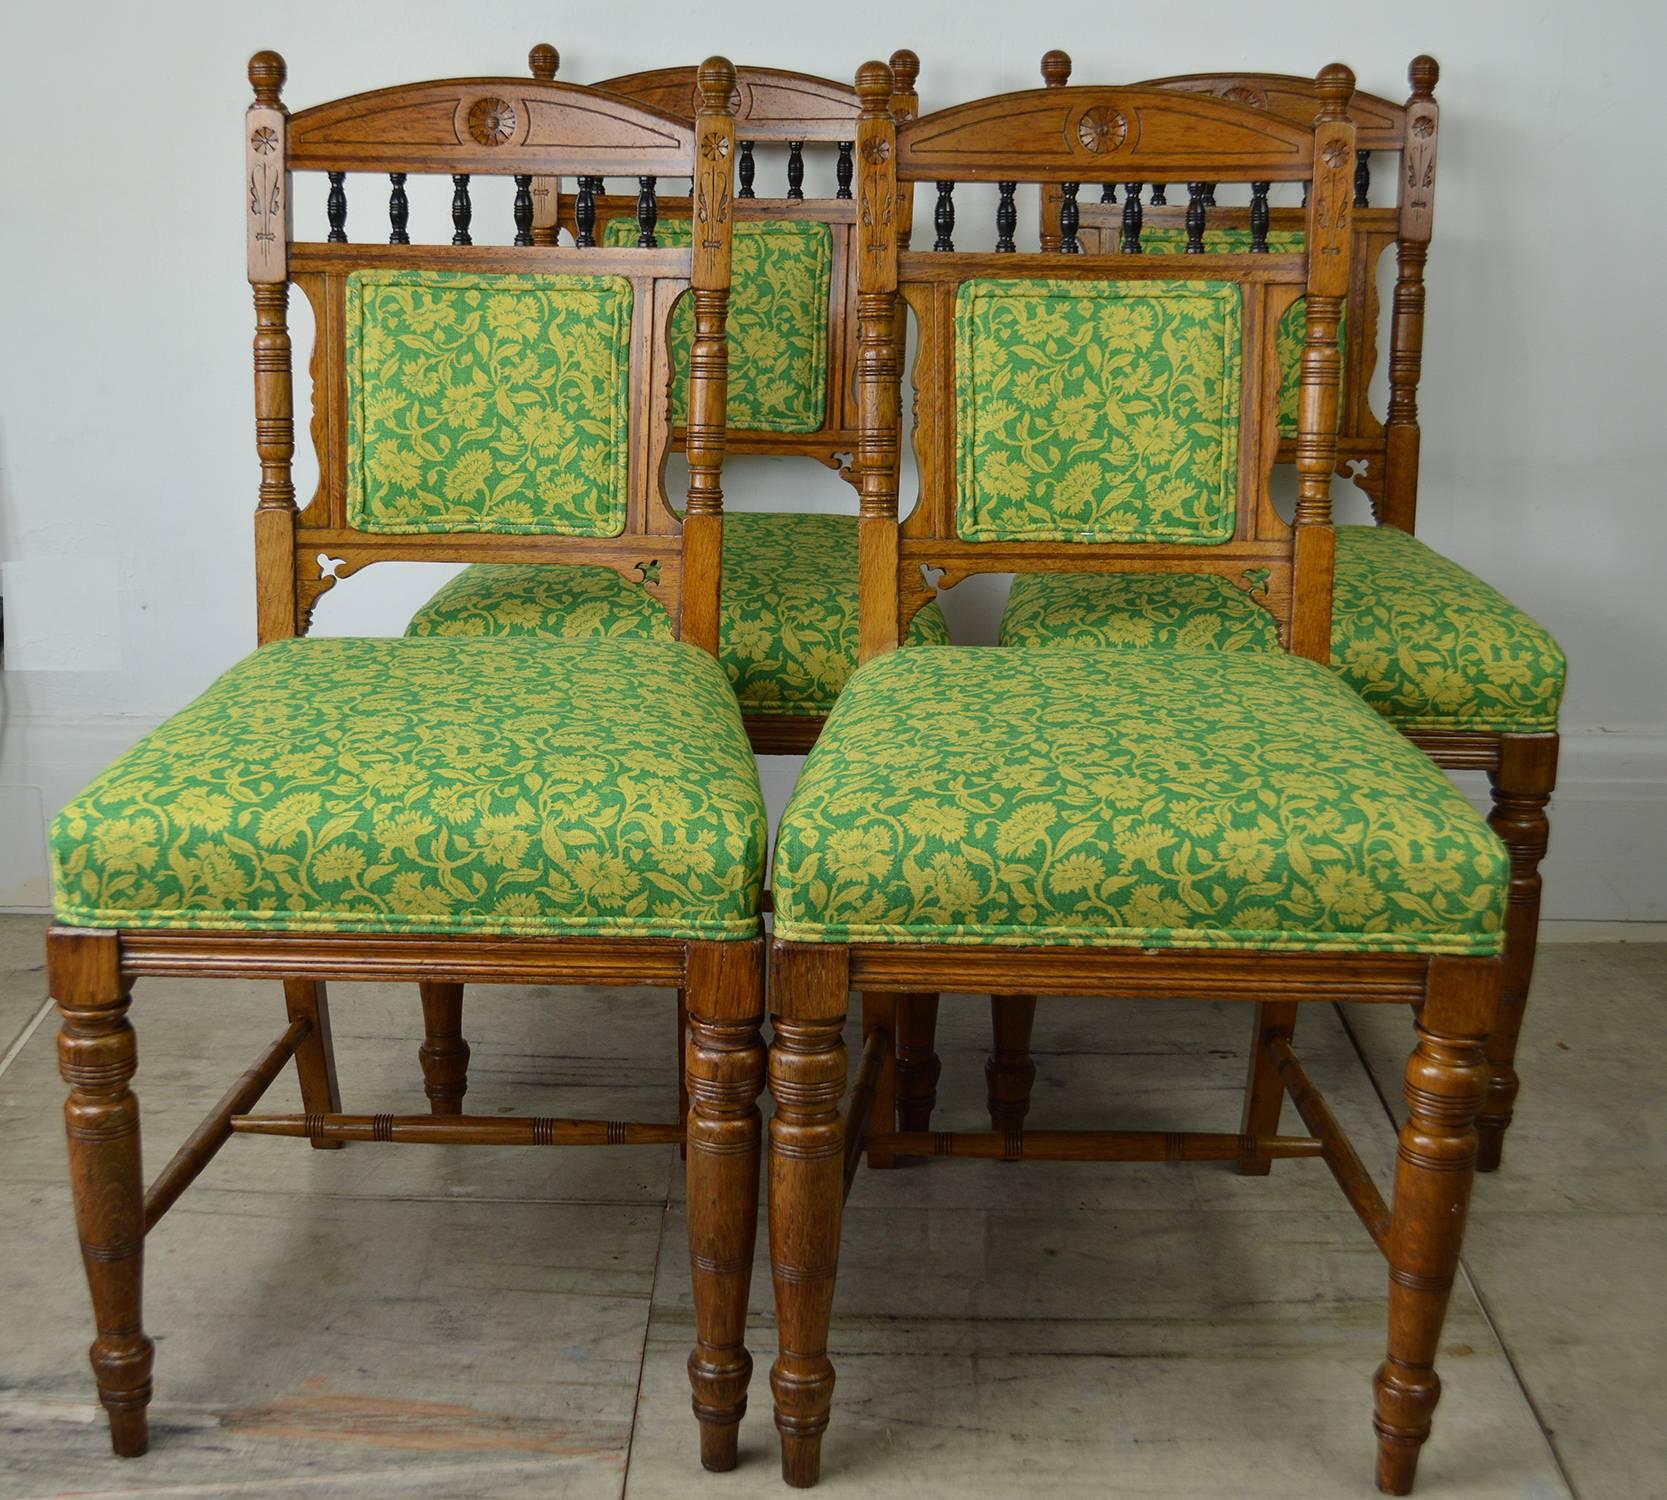 Early 20th Century Set of Four Antique Aesthetic Style Chairs, English, circa 1900